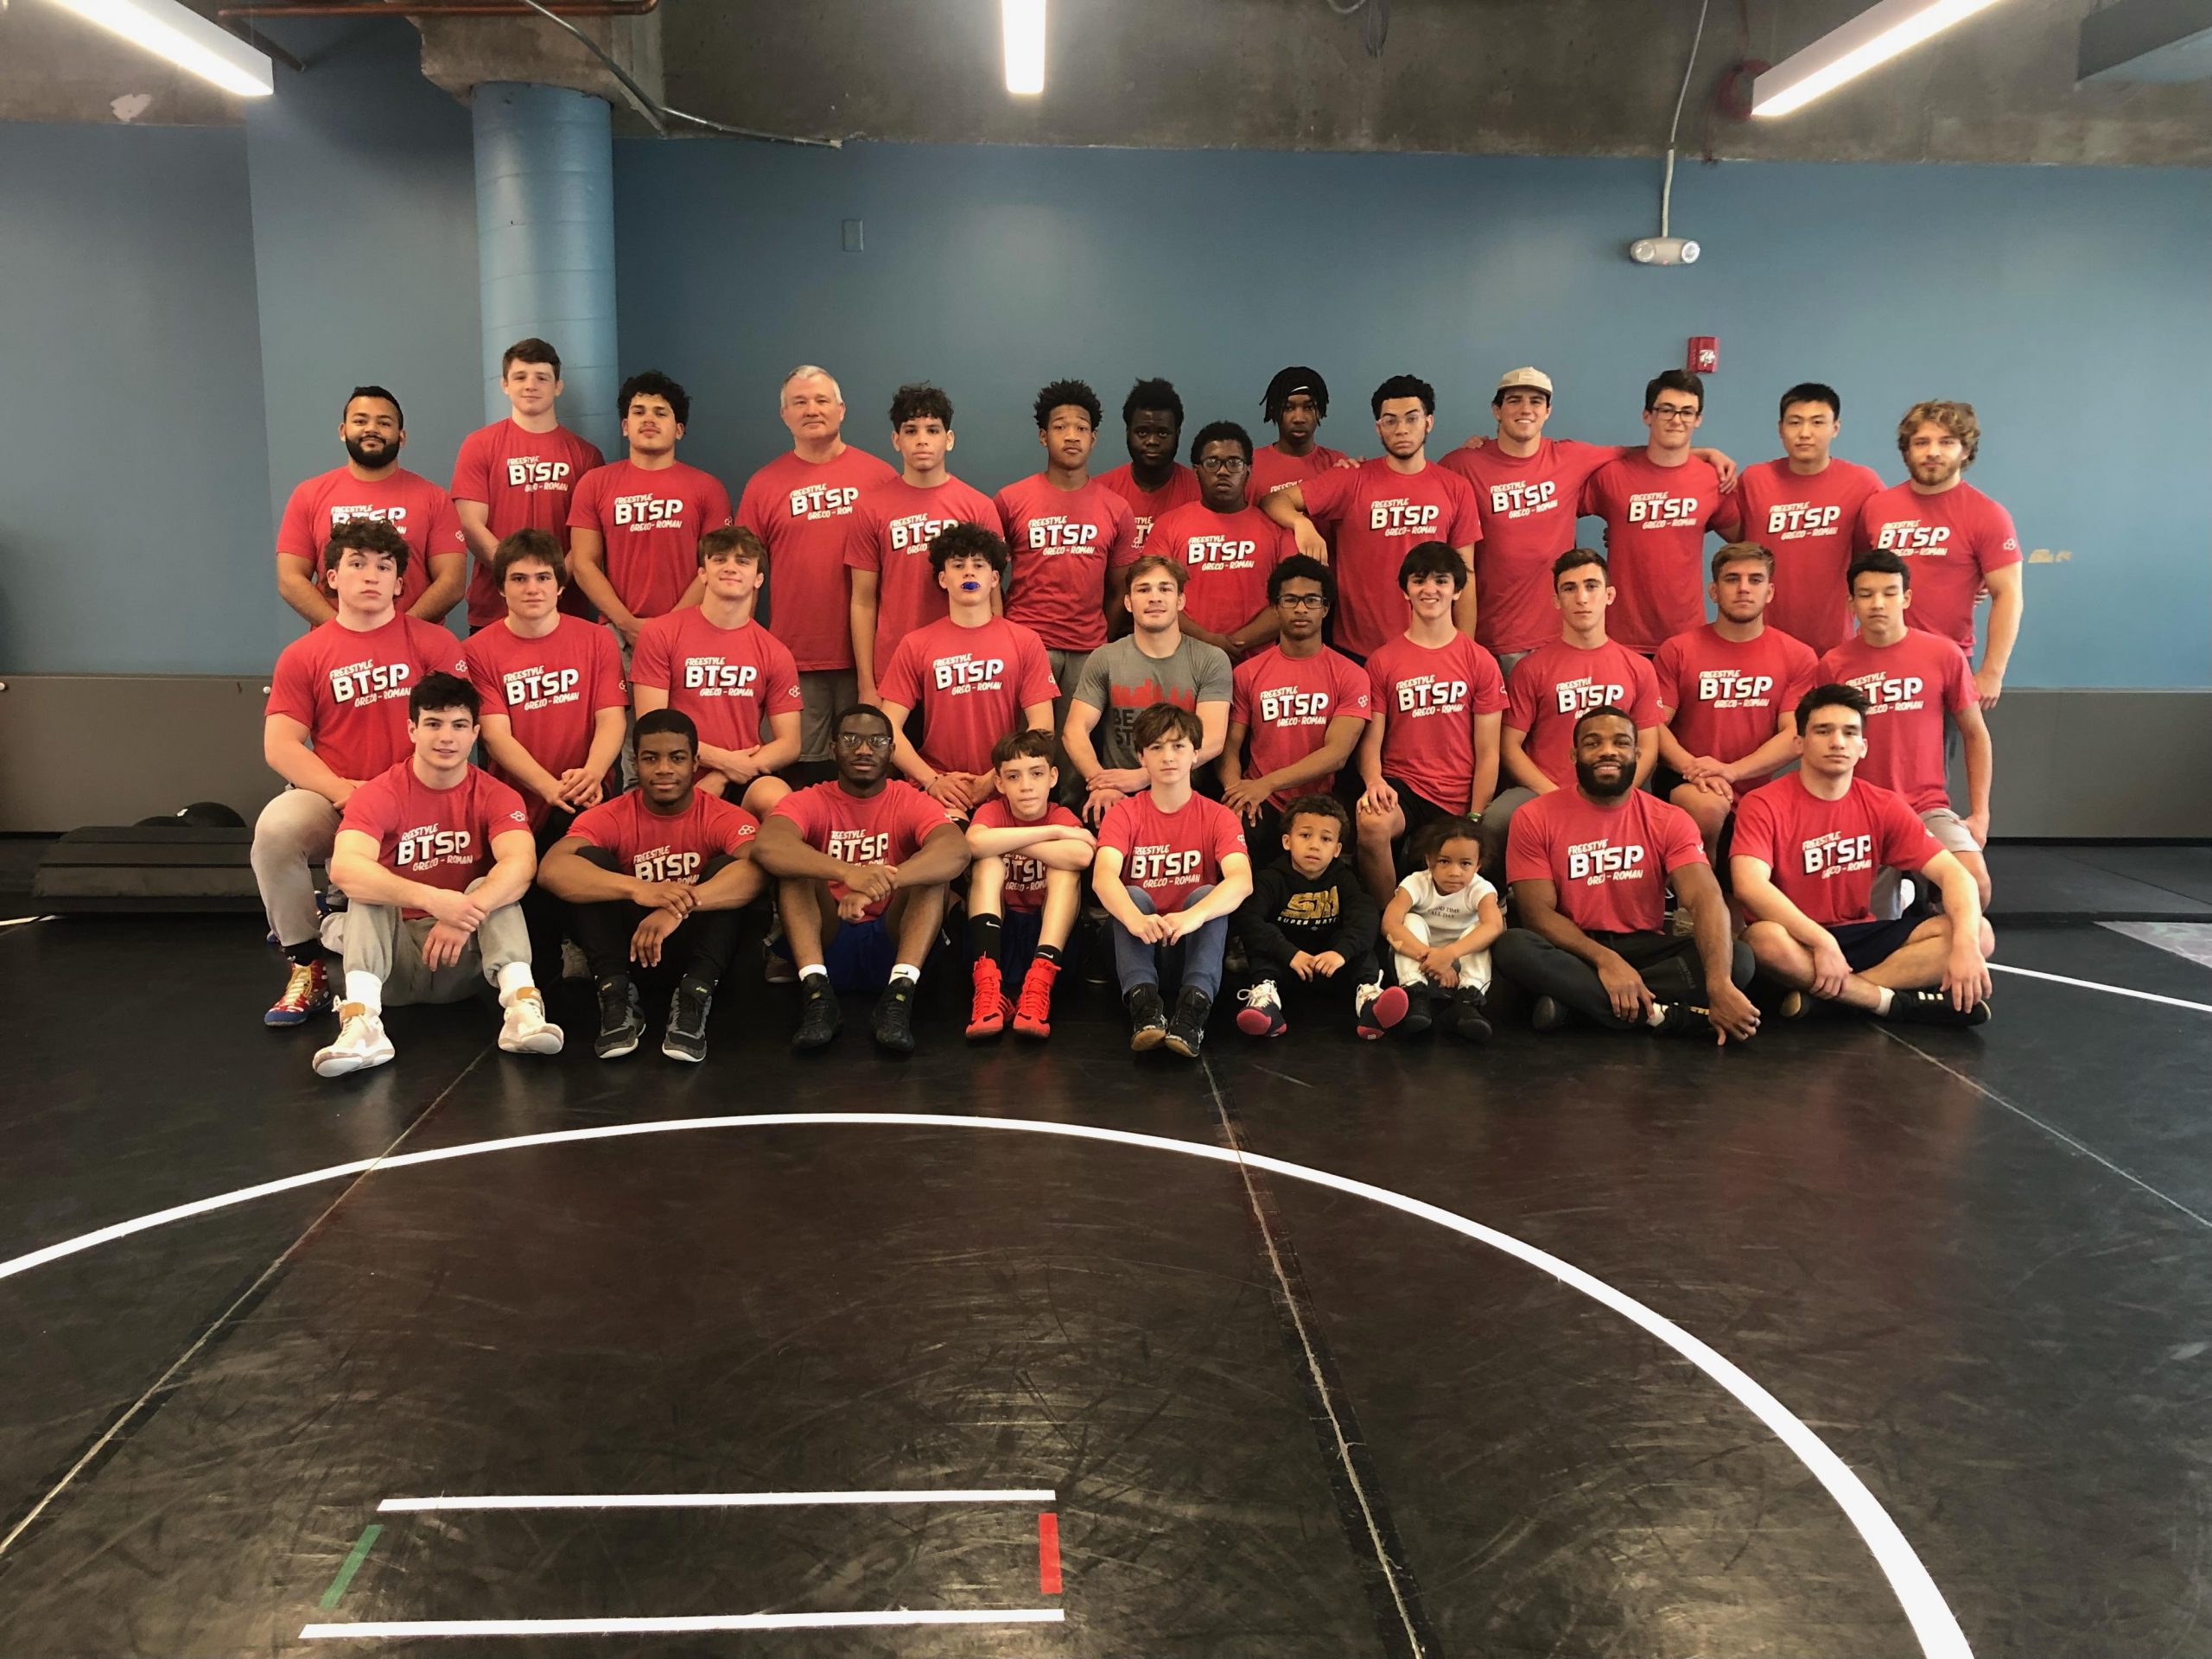 11 Wrestlers Qualify for the USA Wrestling National Championship